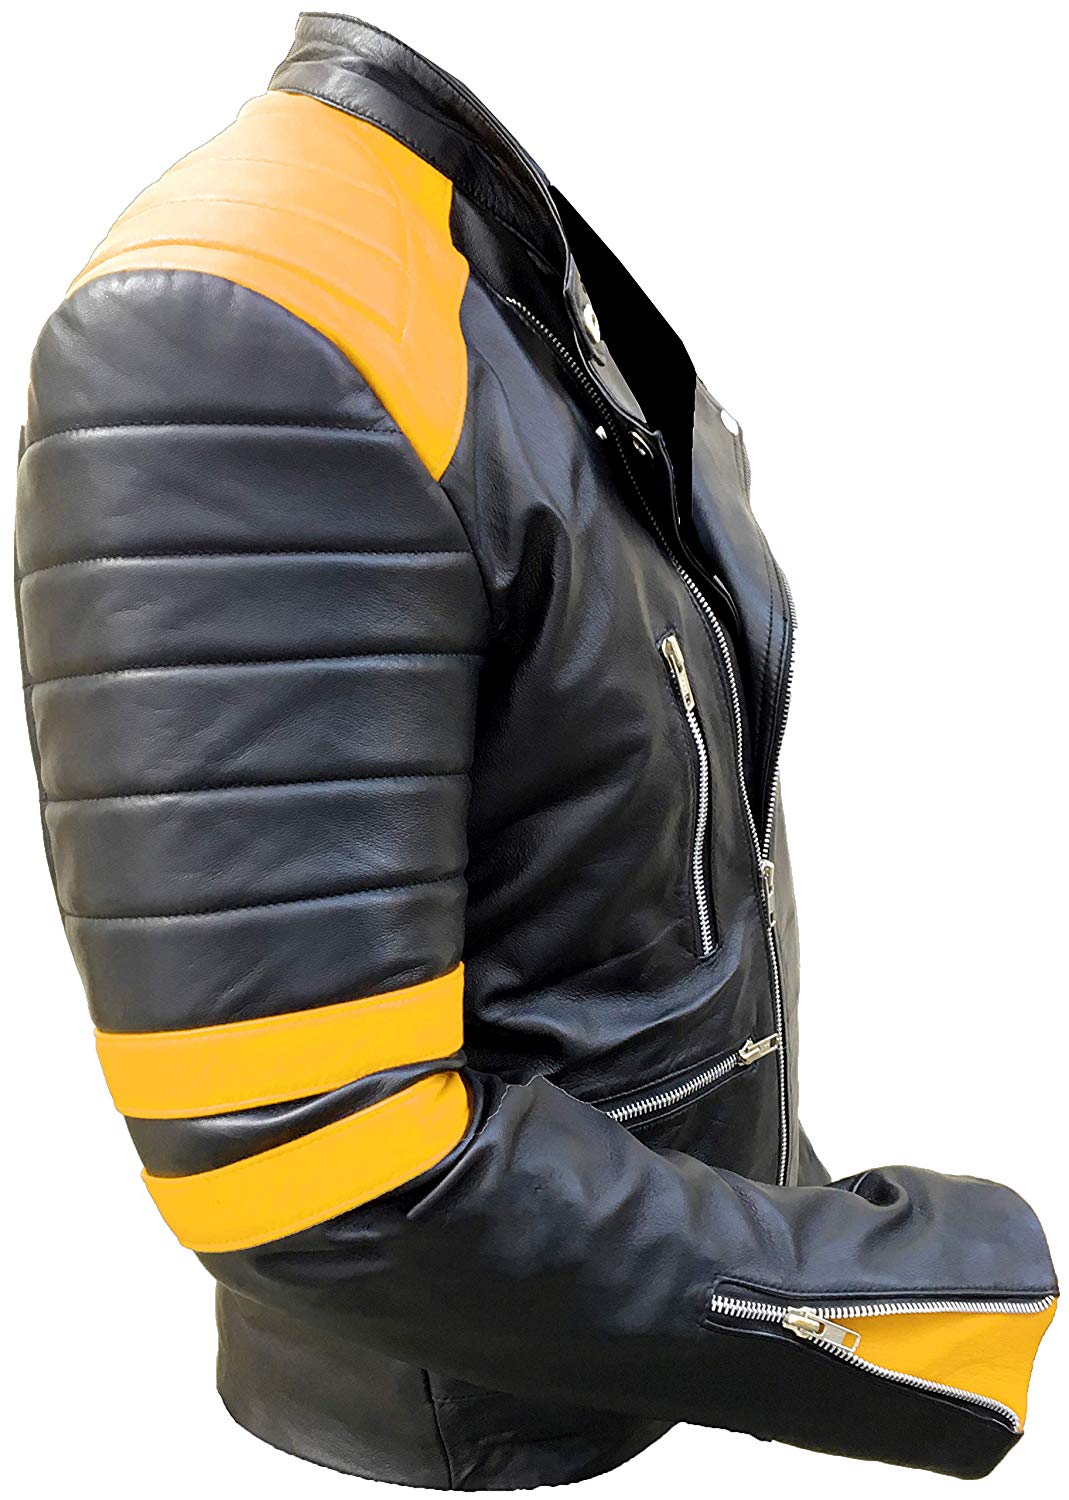 Maker of Jacket Biker Jackets Men's Classic Yellow and Black Leather